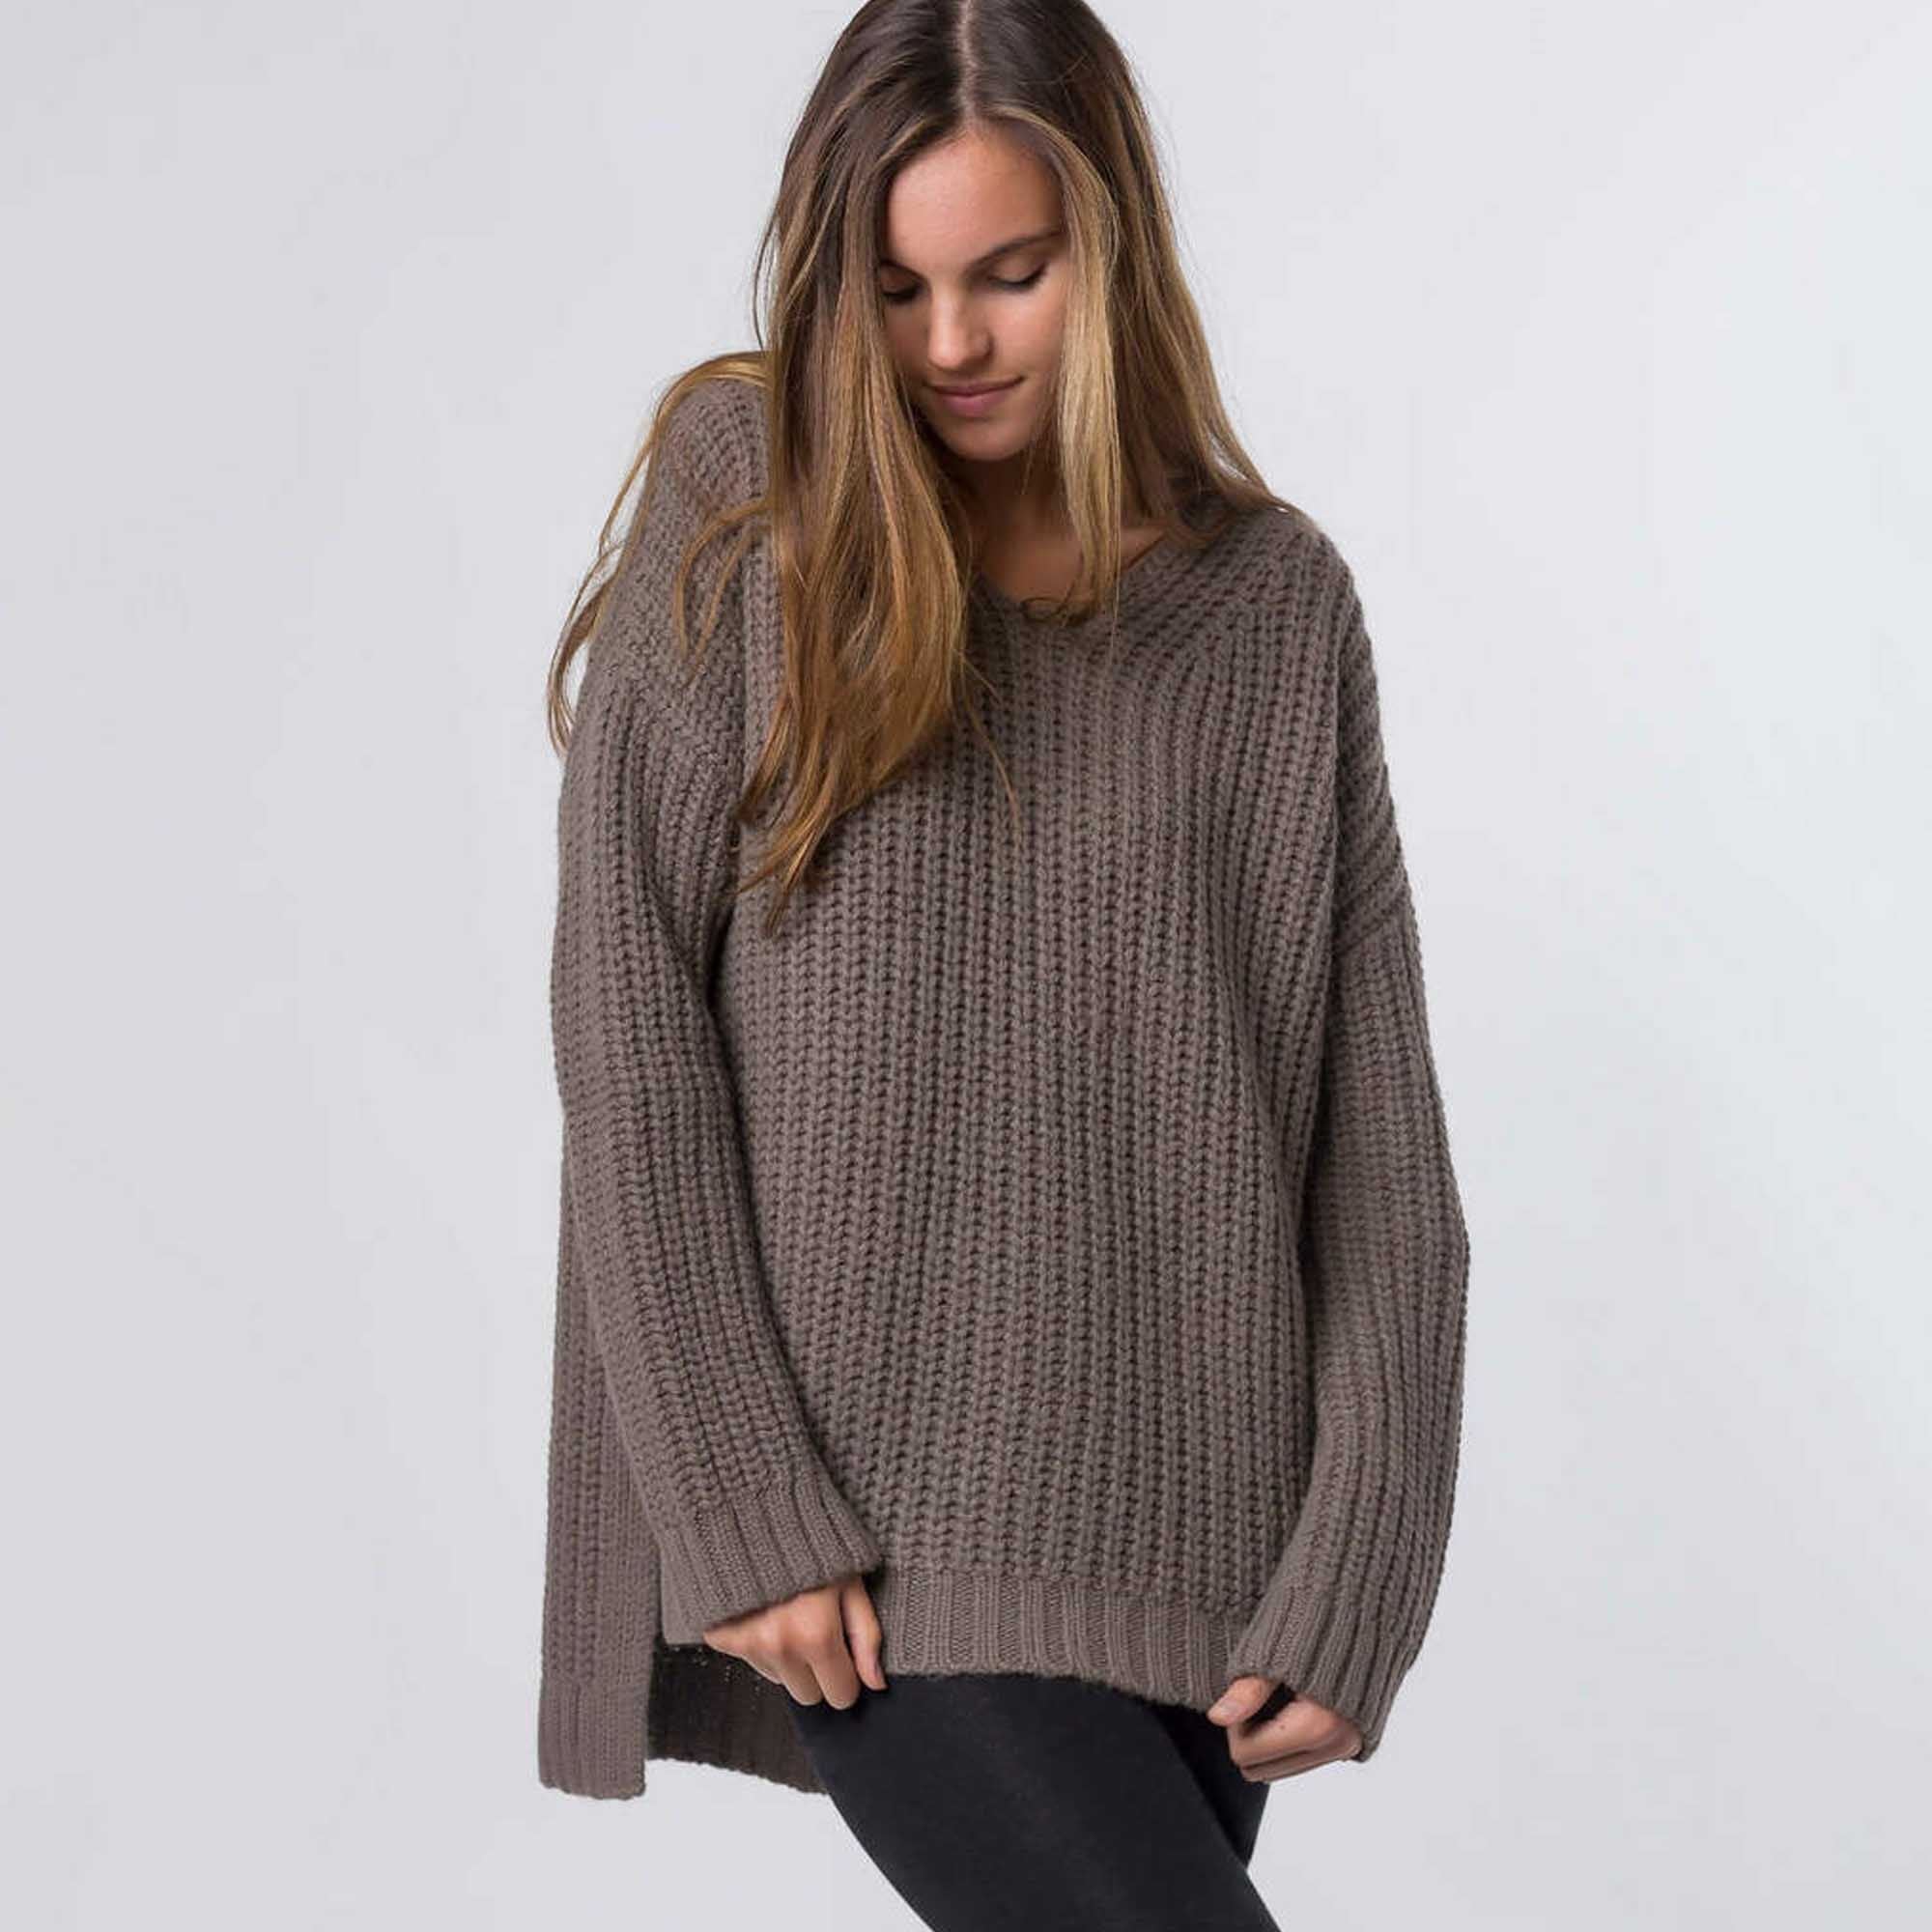 Alpaca Wool Oversized Sweater for Women, Knit Cardigan, Light Beige, Gray,  White, Black Tunic, Knitted Pullover, Oversize Dress, Jumper -  Canada